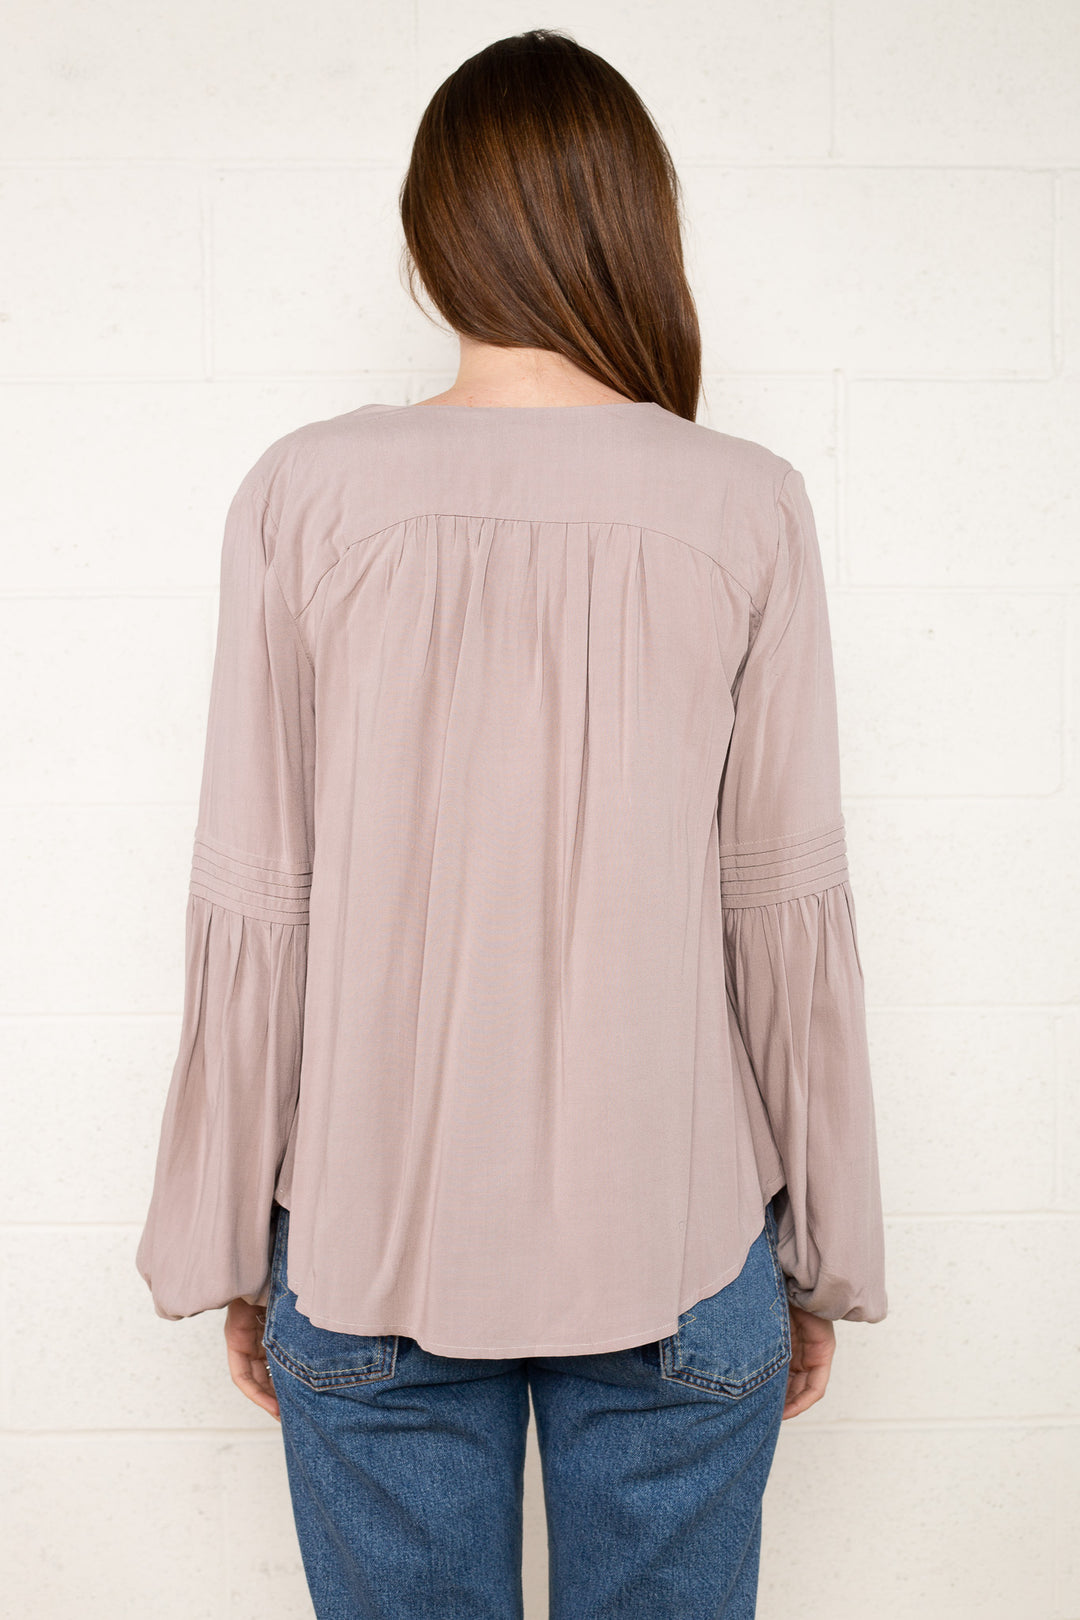 Ariella Pintuck Flare Sleeve Top by NLT: Chic long sleeve blouse with intricate pin-tucking and trendy flare sleeves. Versatile style for day-to-night transitions, blending sophistication and comfort seamlessly.